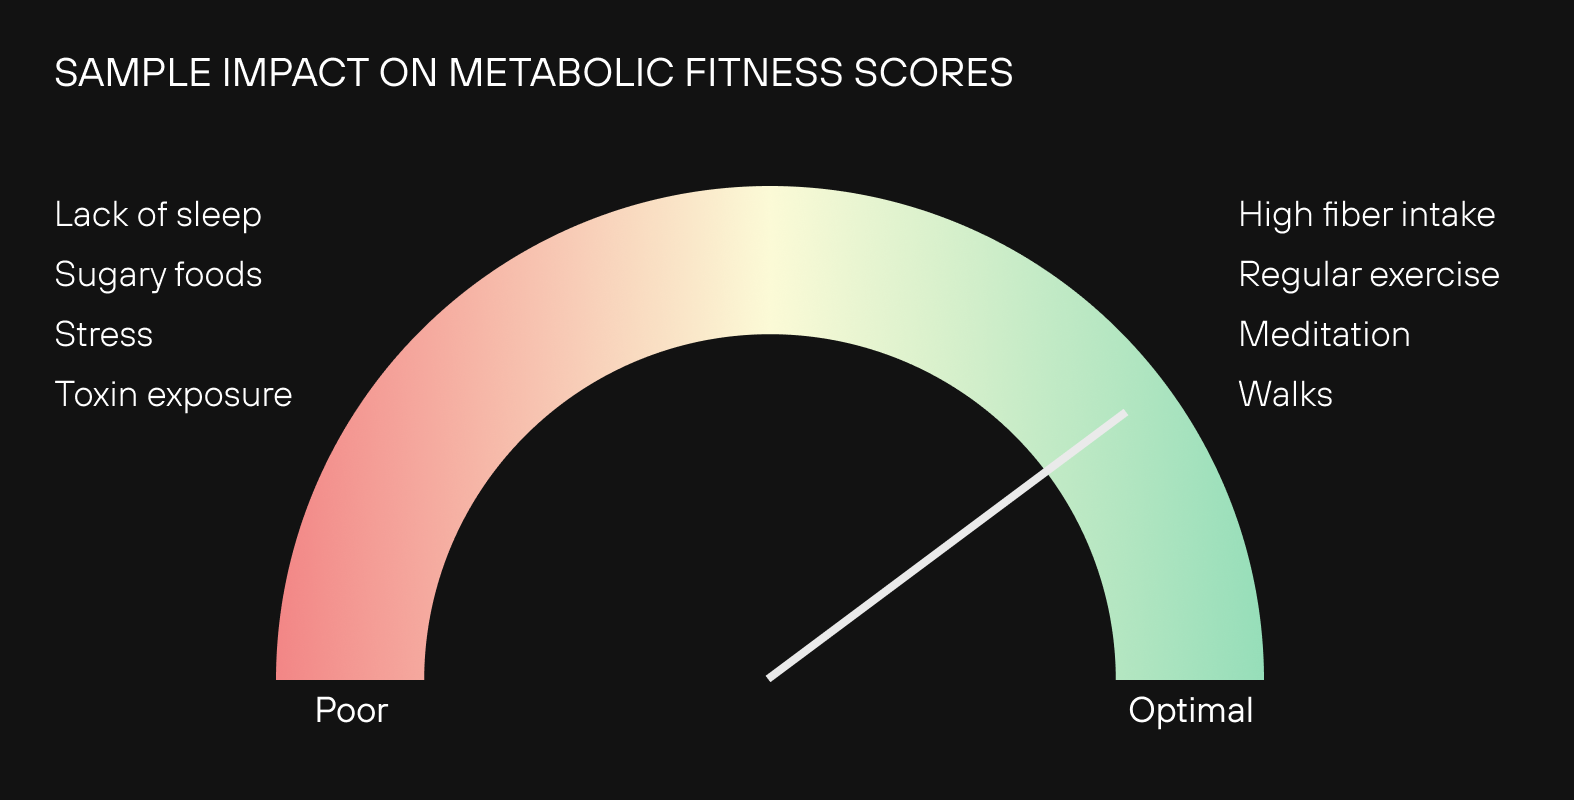 poor and optimal effects of metabolic fitness